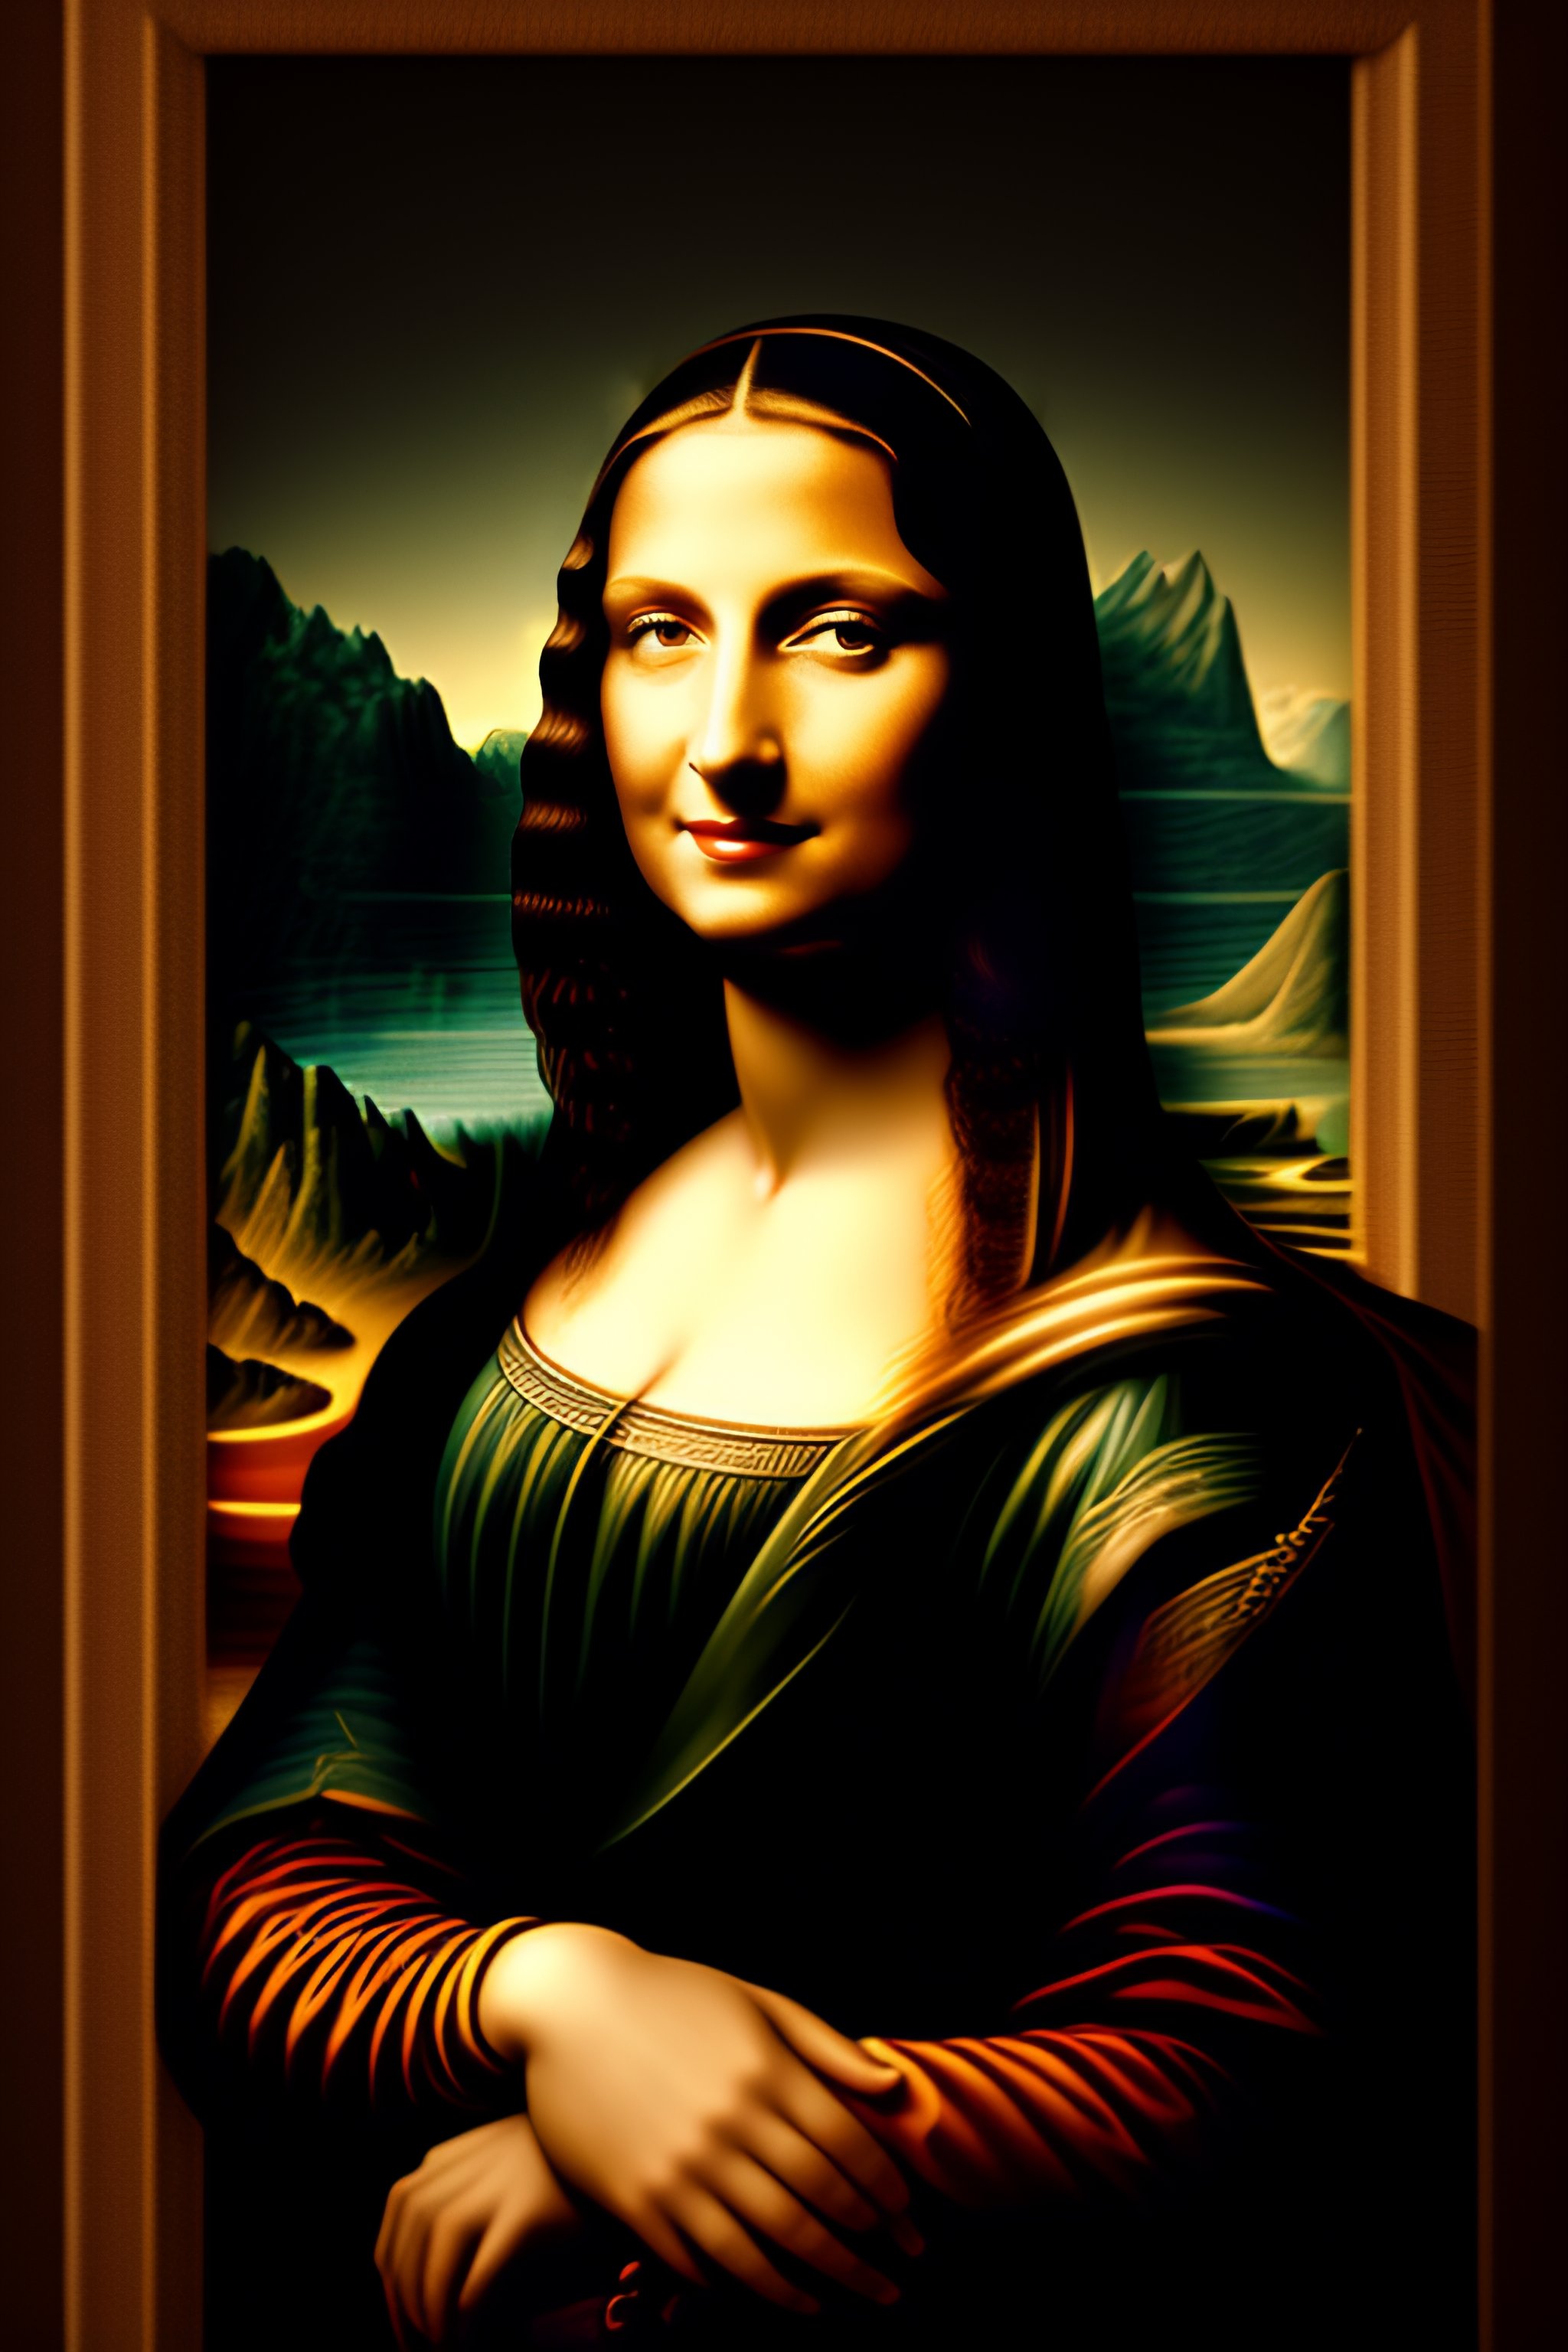 Mona Lisa Super Chacopaper White - Brushes and More